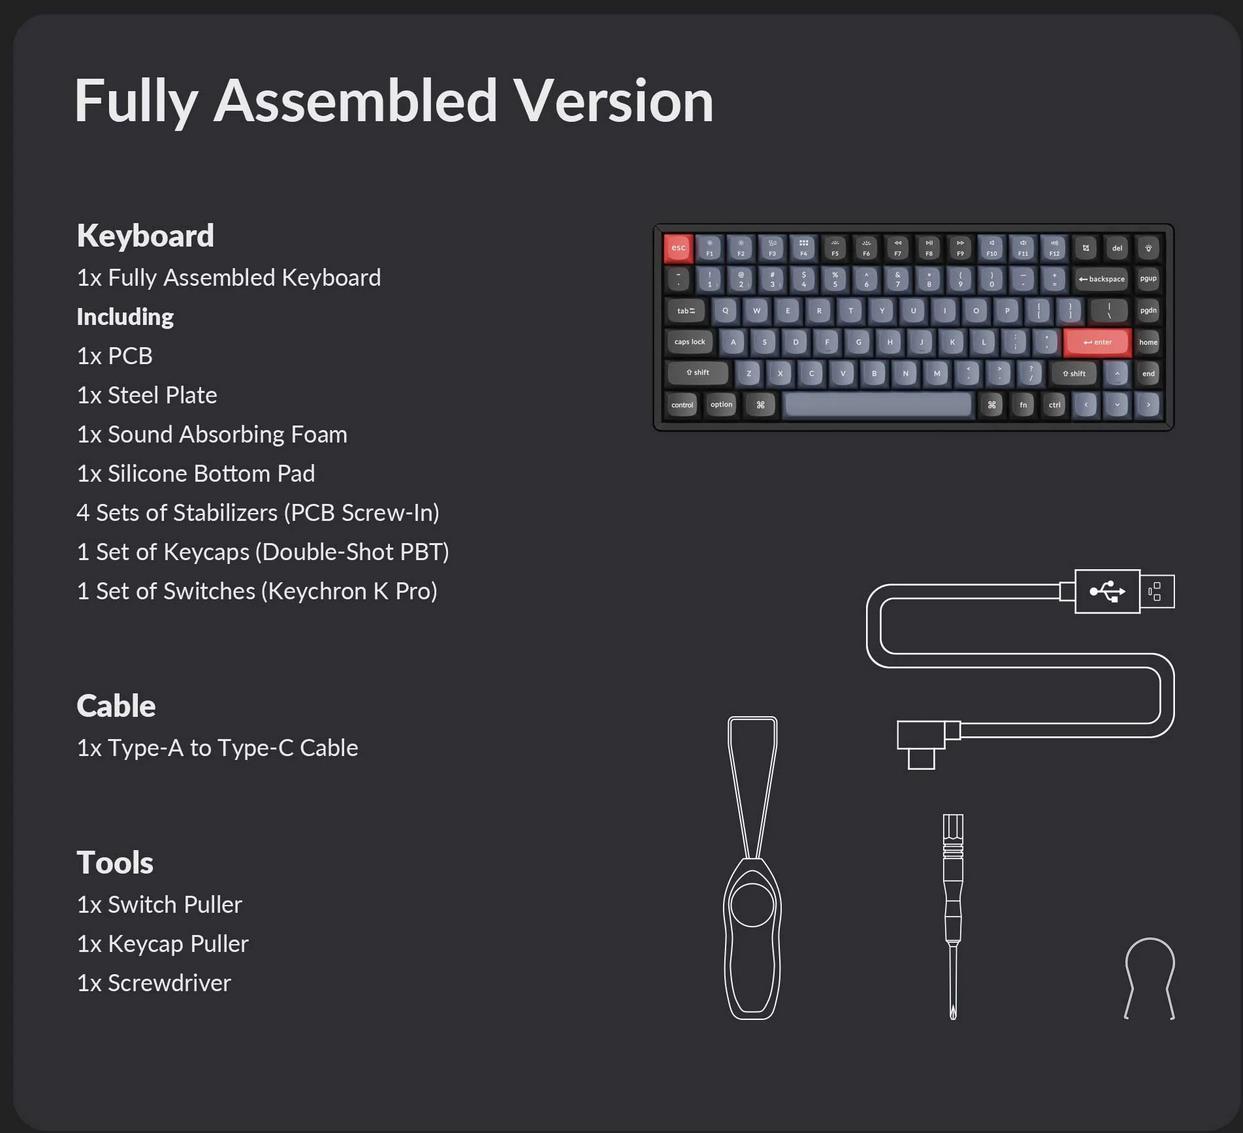 A large marketing image providing additional information about the product Keychron K2 Pro Compact RGB Wireless Mechanical Keyboard - Black (Red Switch) - Additional alt info not provided